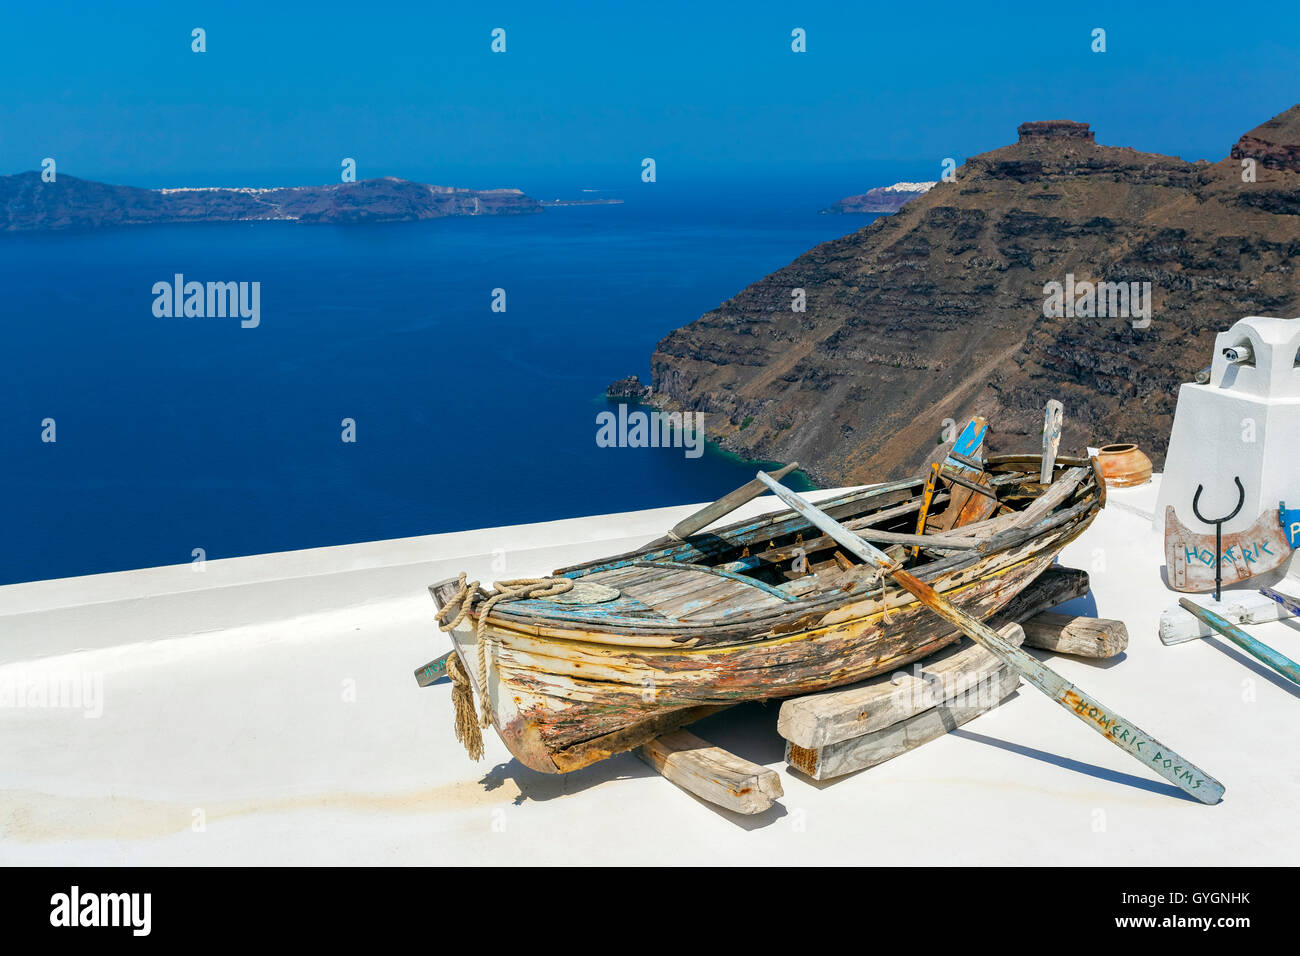 Old Boat with the Caldera scenic view on the backgound in Thira, Fira, Santorini, Cyclades Islands, Greece Stock Photo